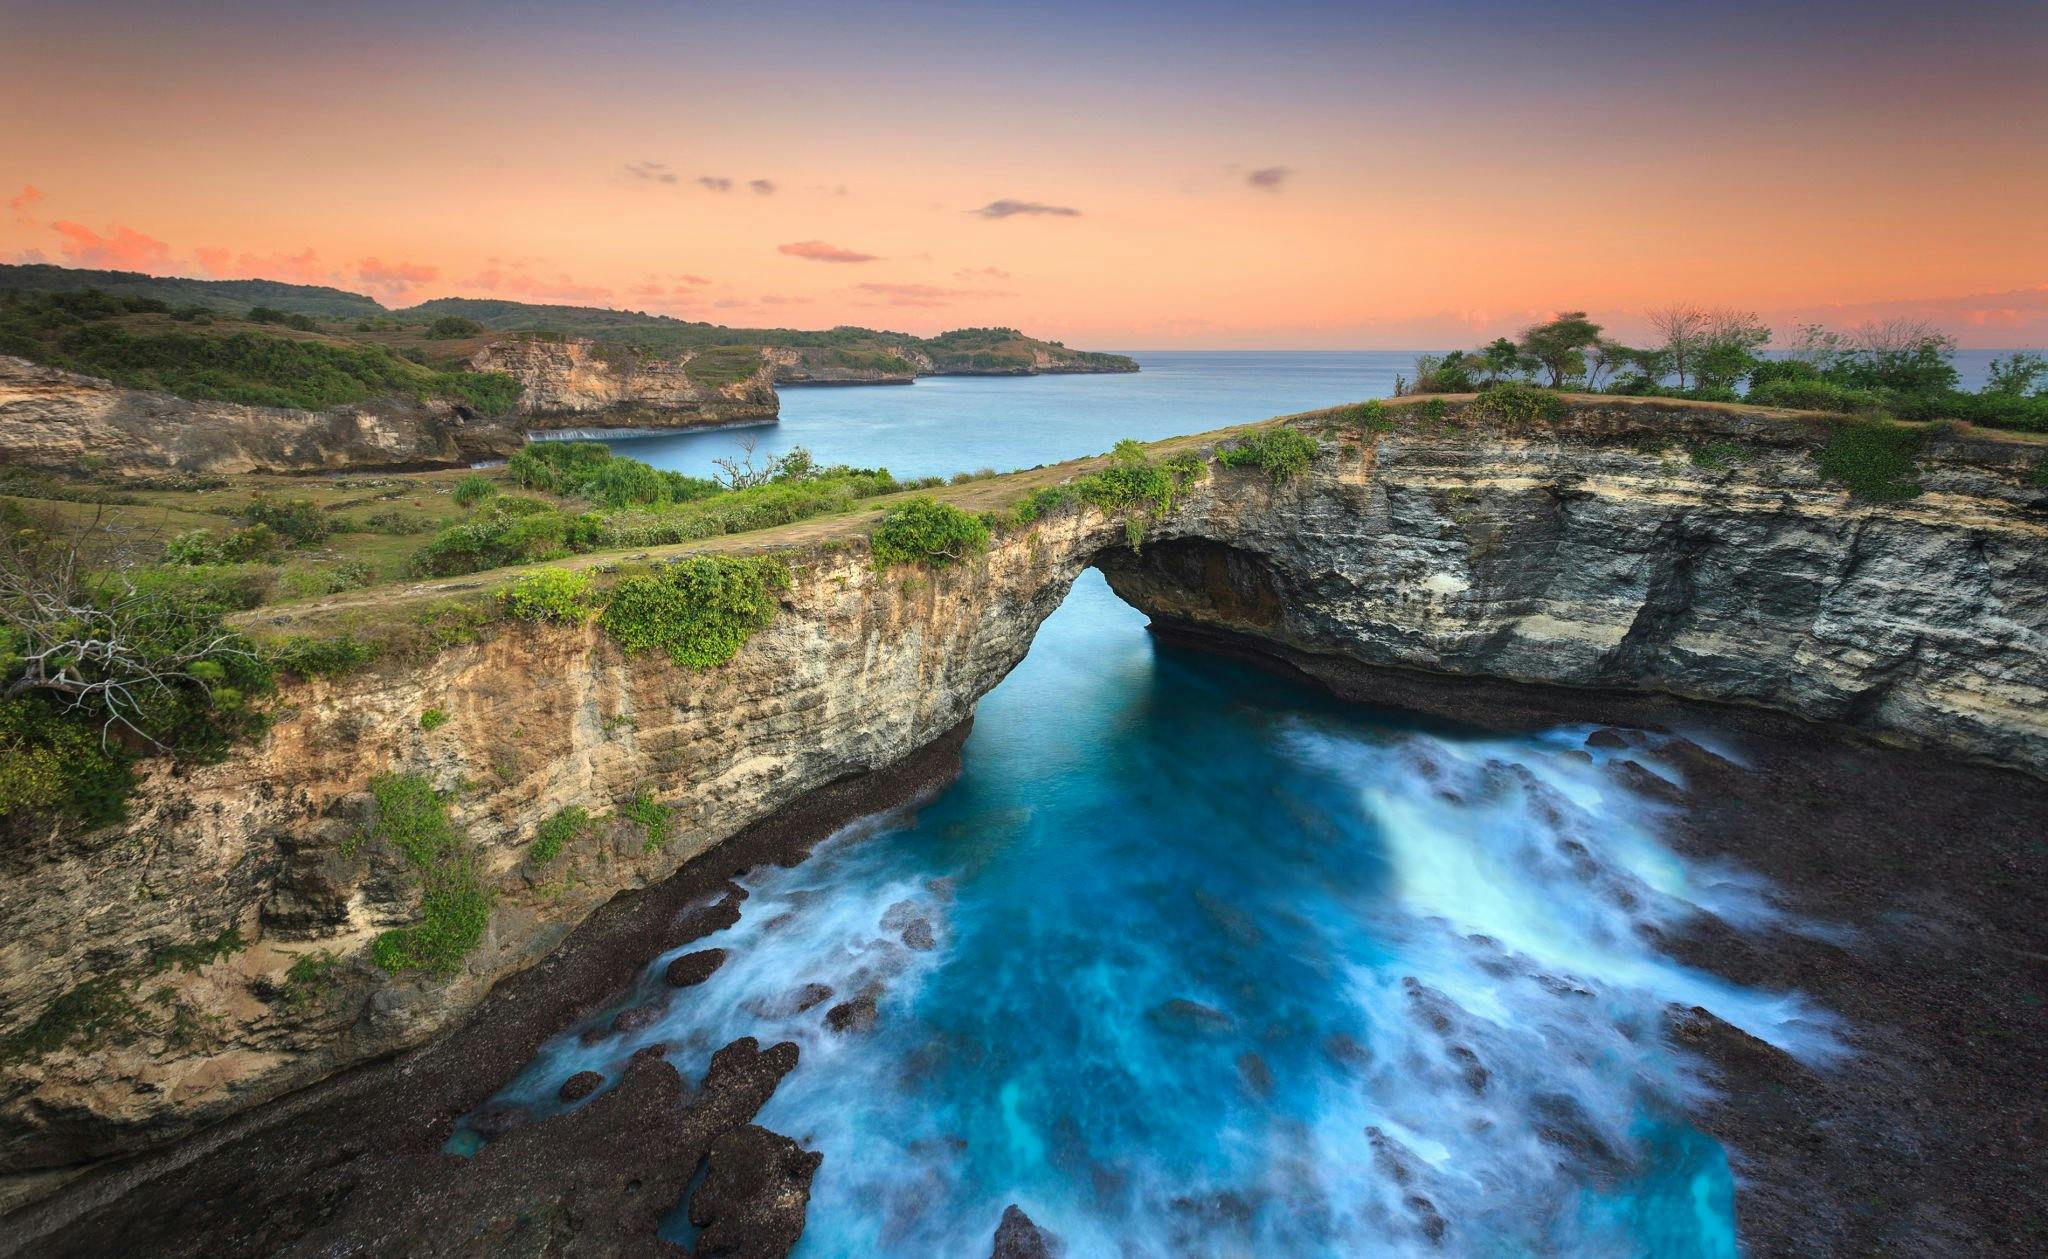 Full day west Nusa Penida private guided tour from Bali Musement